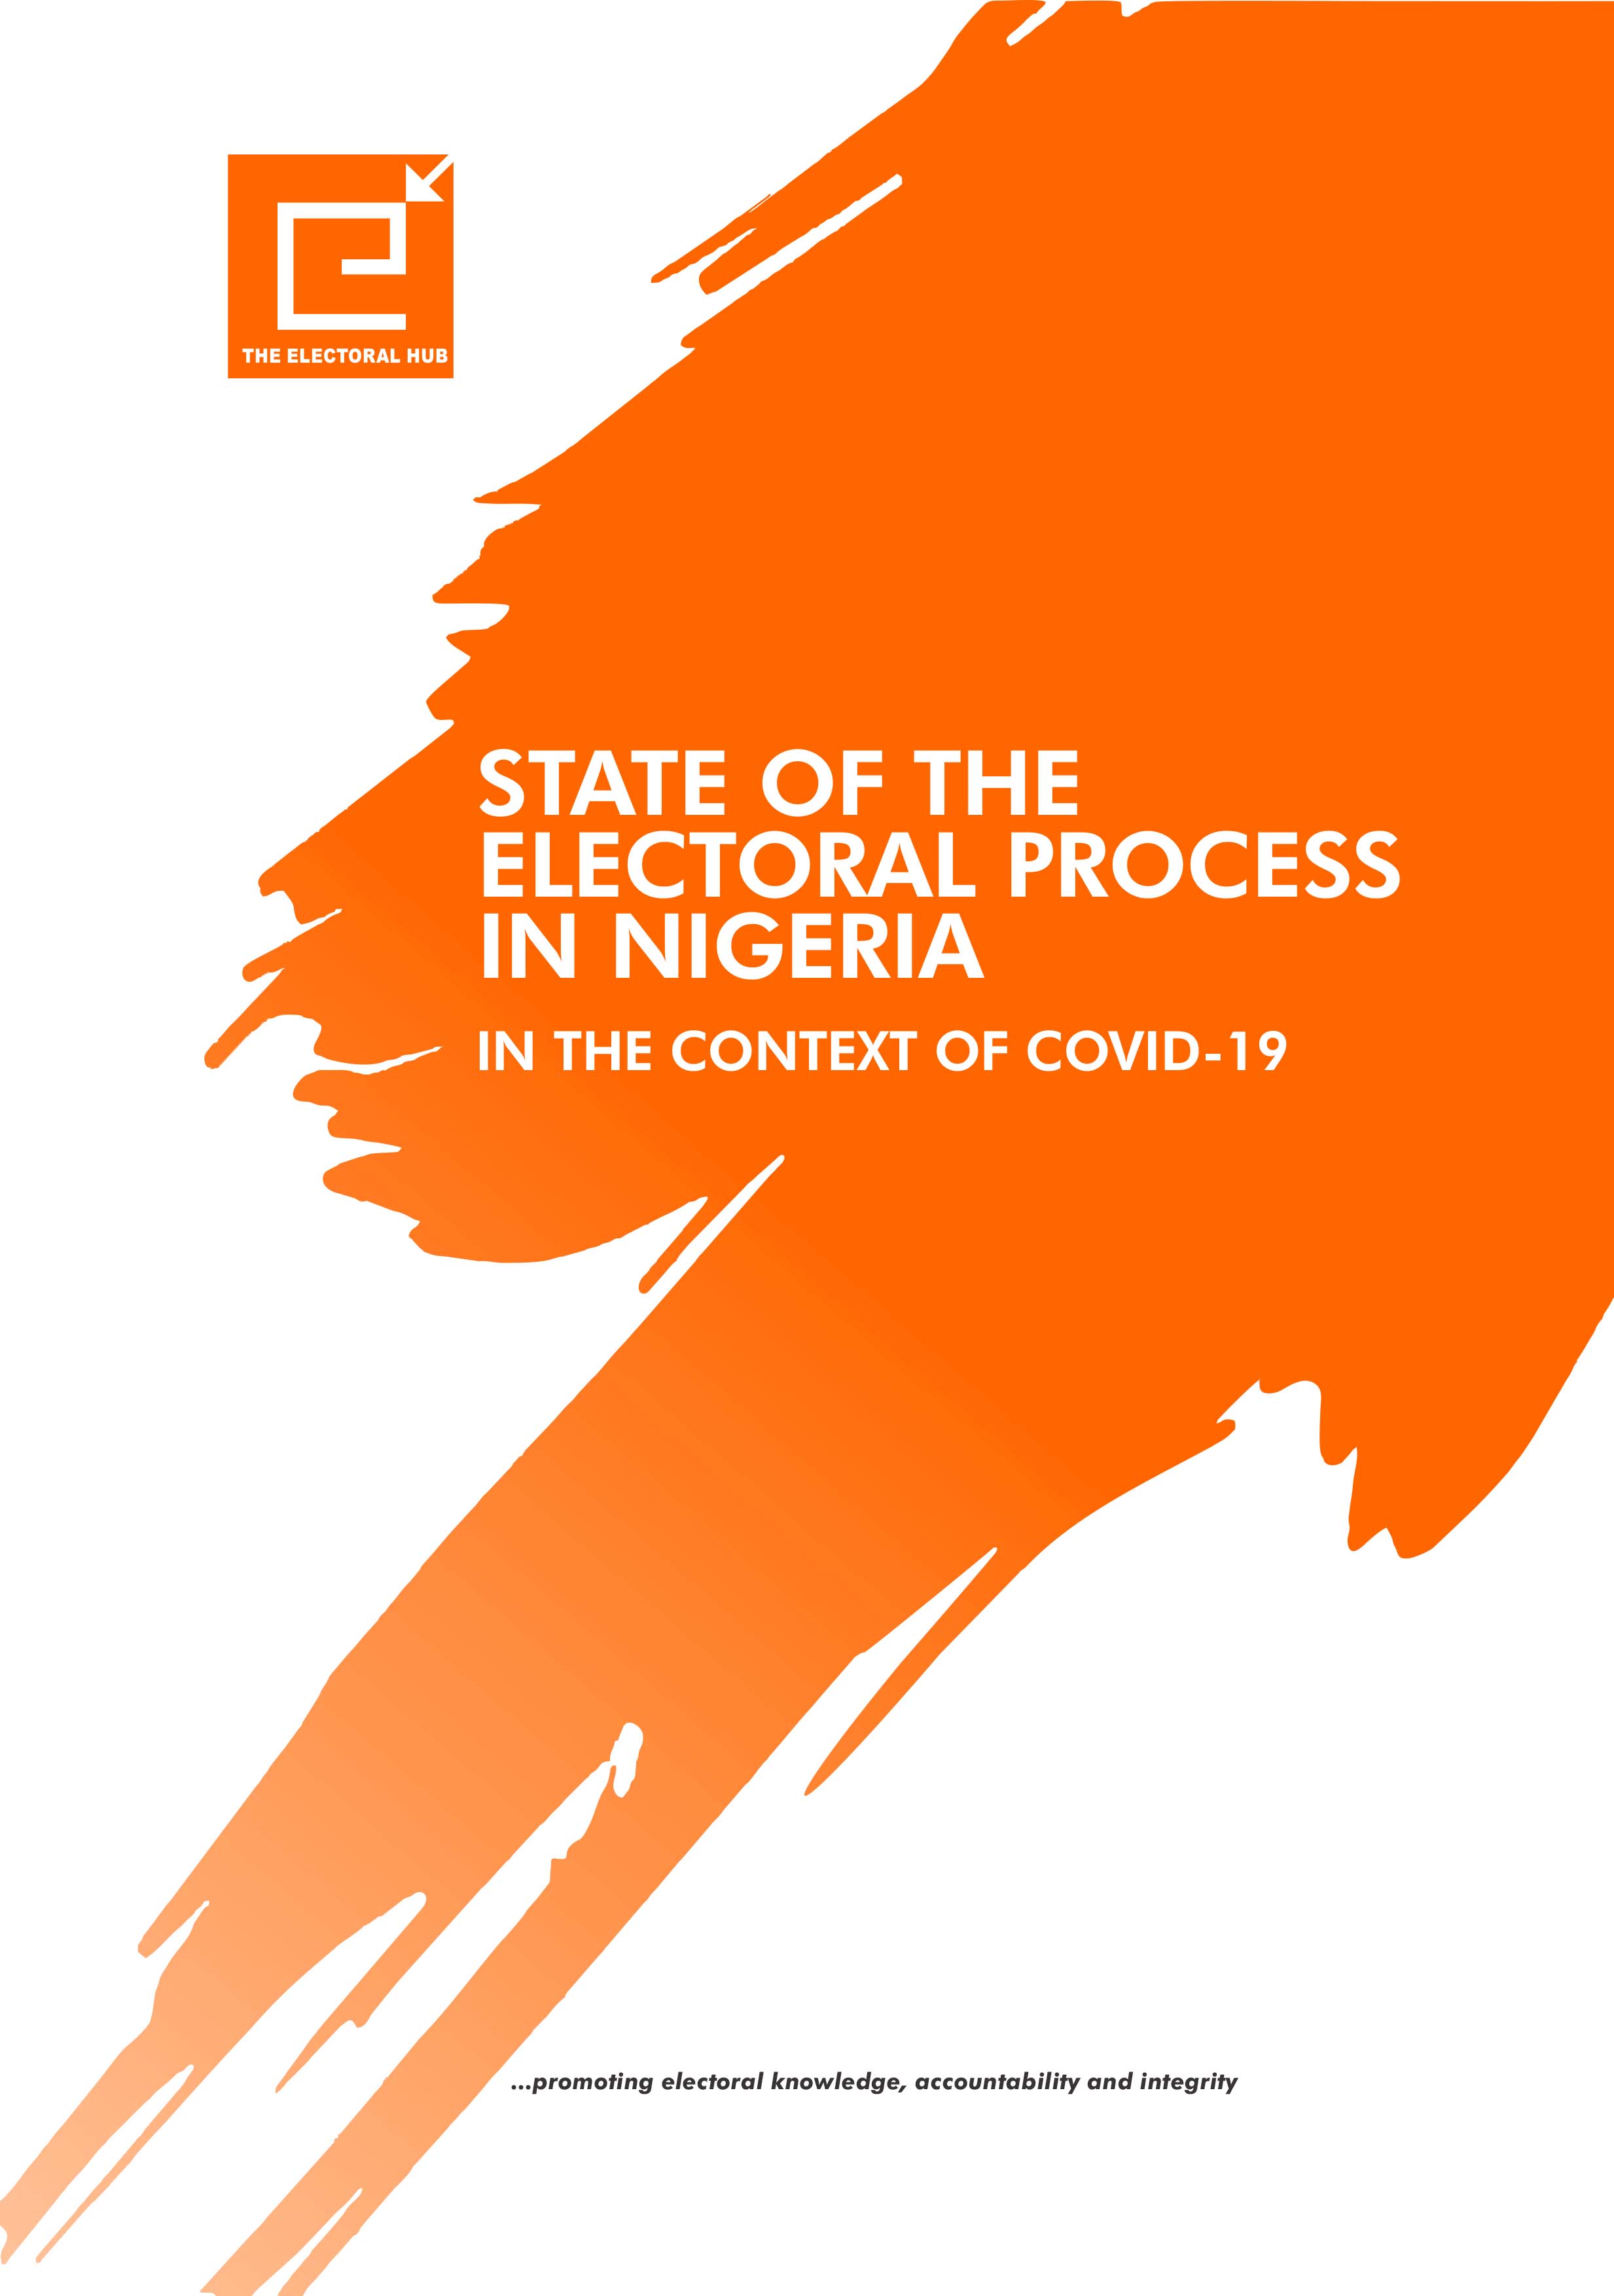 State of the Electoral process in Nigeria in the context of COVID-19